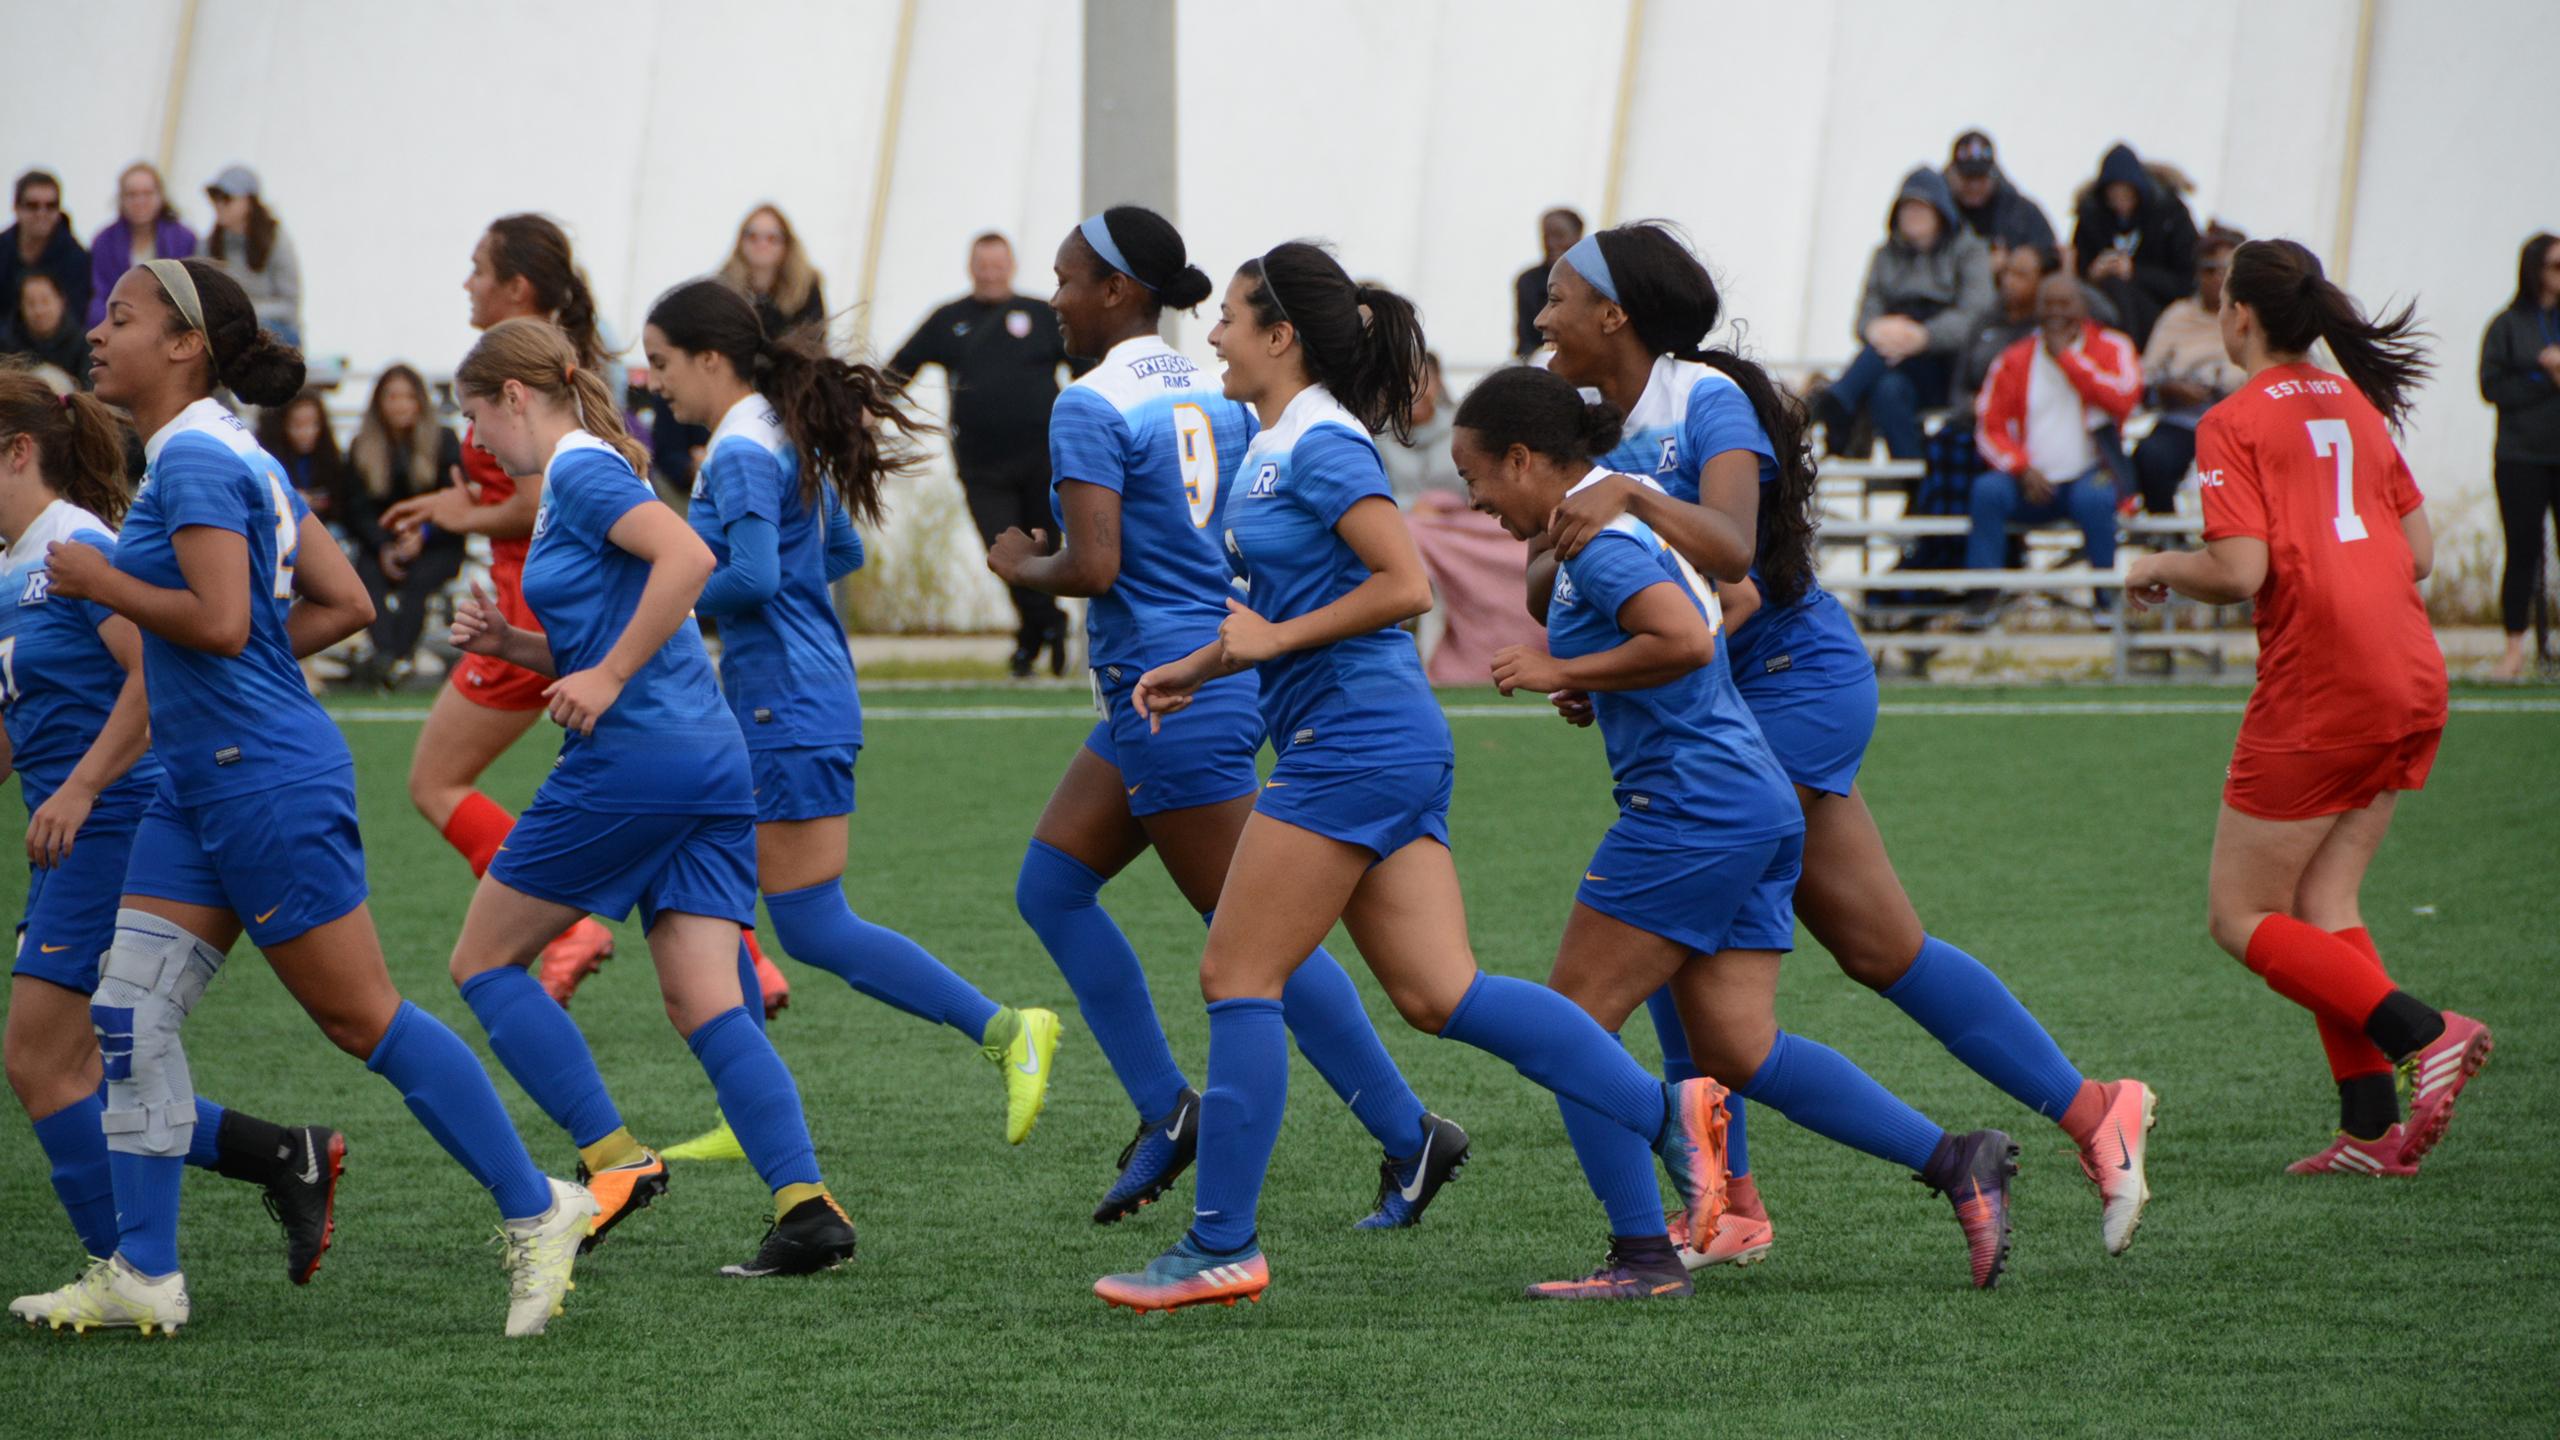 A photo of female Ryerson students running across a soccer field